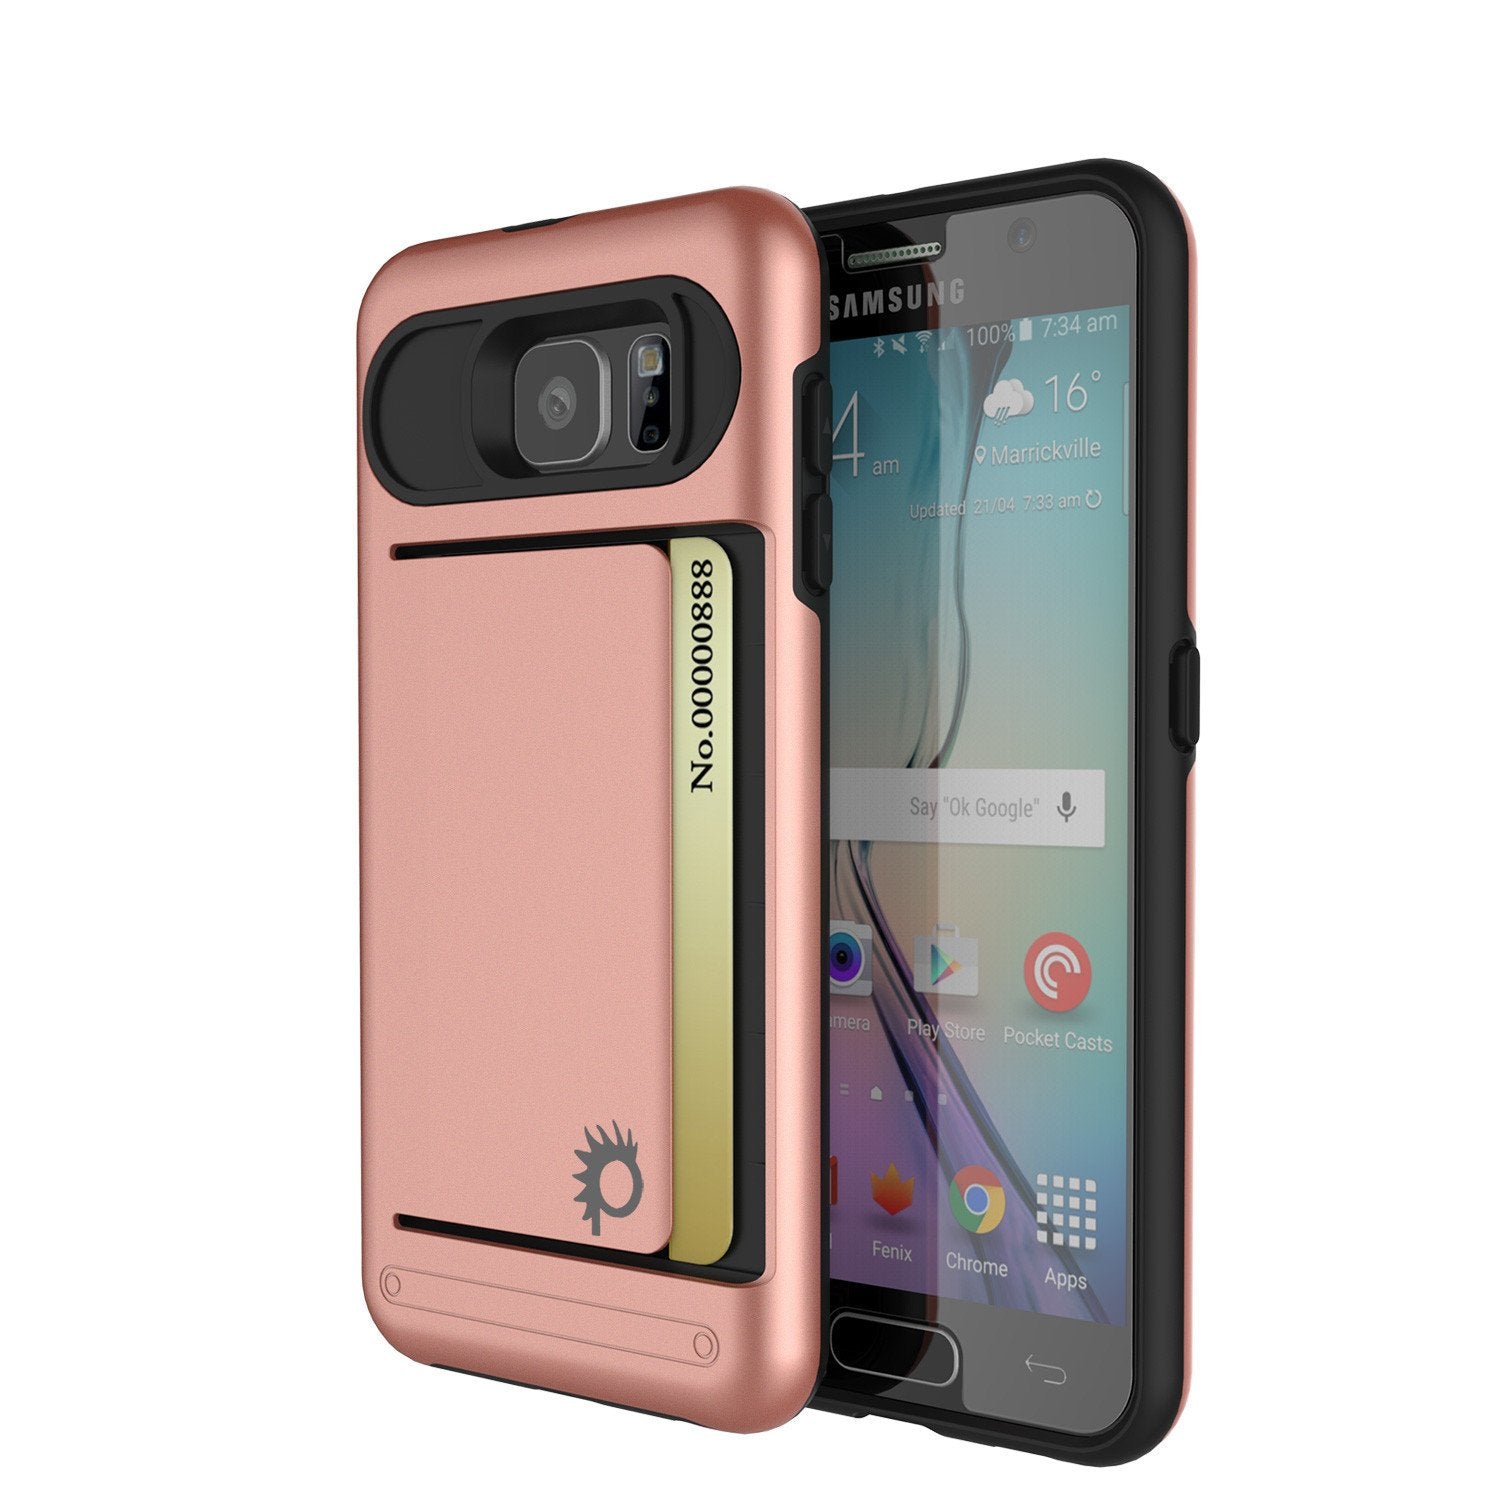 Galaxy S6 EDGE Plus Case PunkCase CLUTCH Rose Gold Series Slim Armor Soft Cover w/ Screen Protector